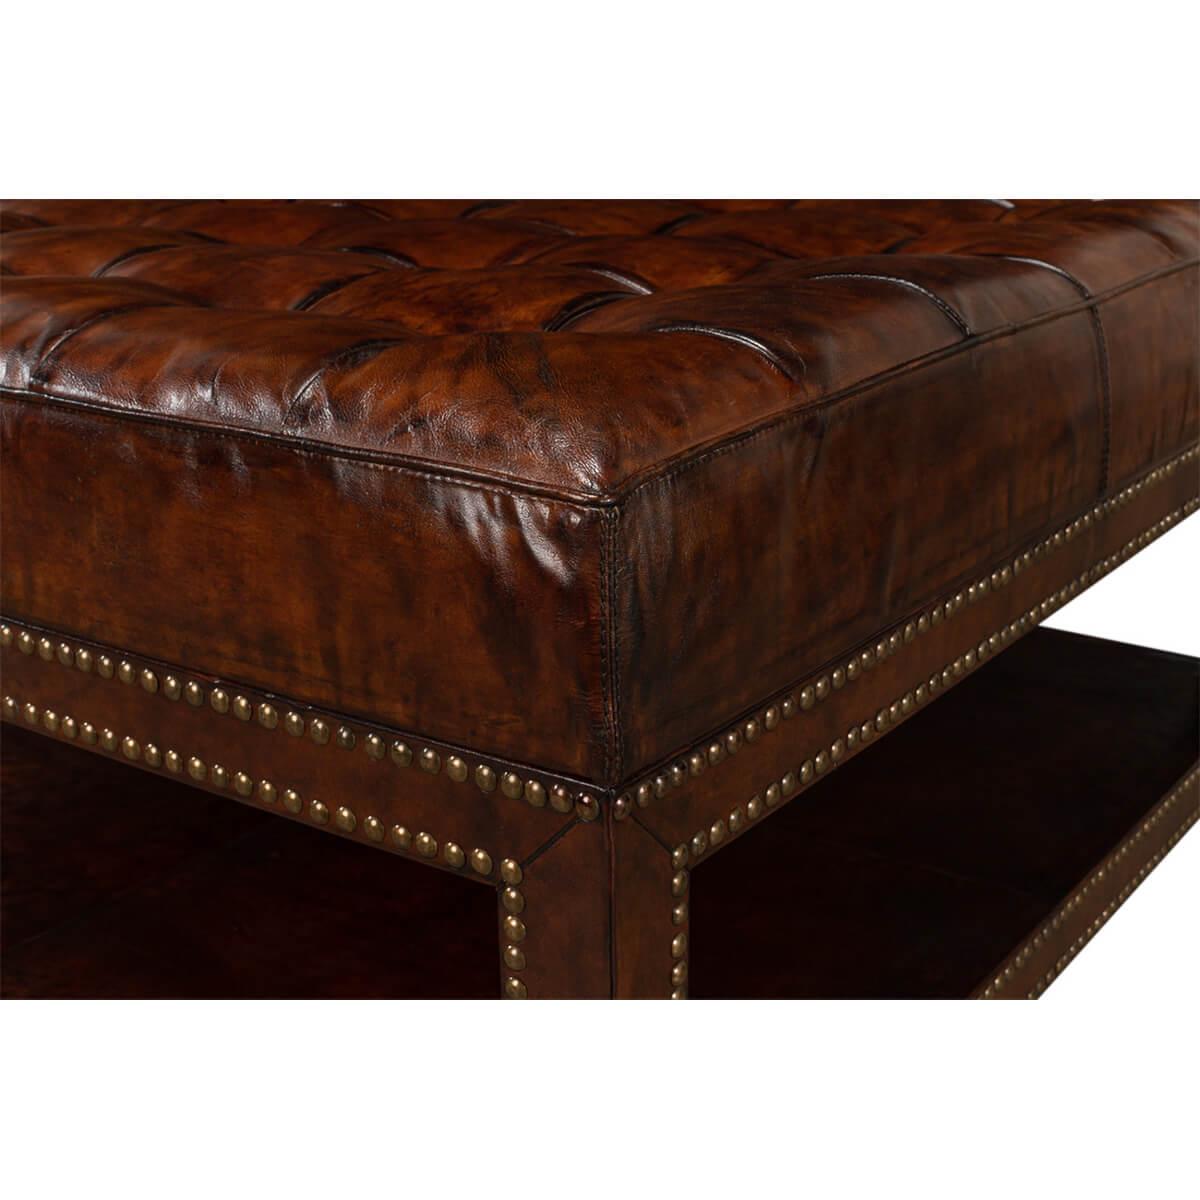 Vintage-Style Tufted Leather Ottoman For Sale 1